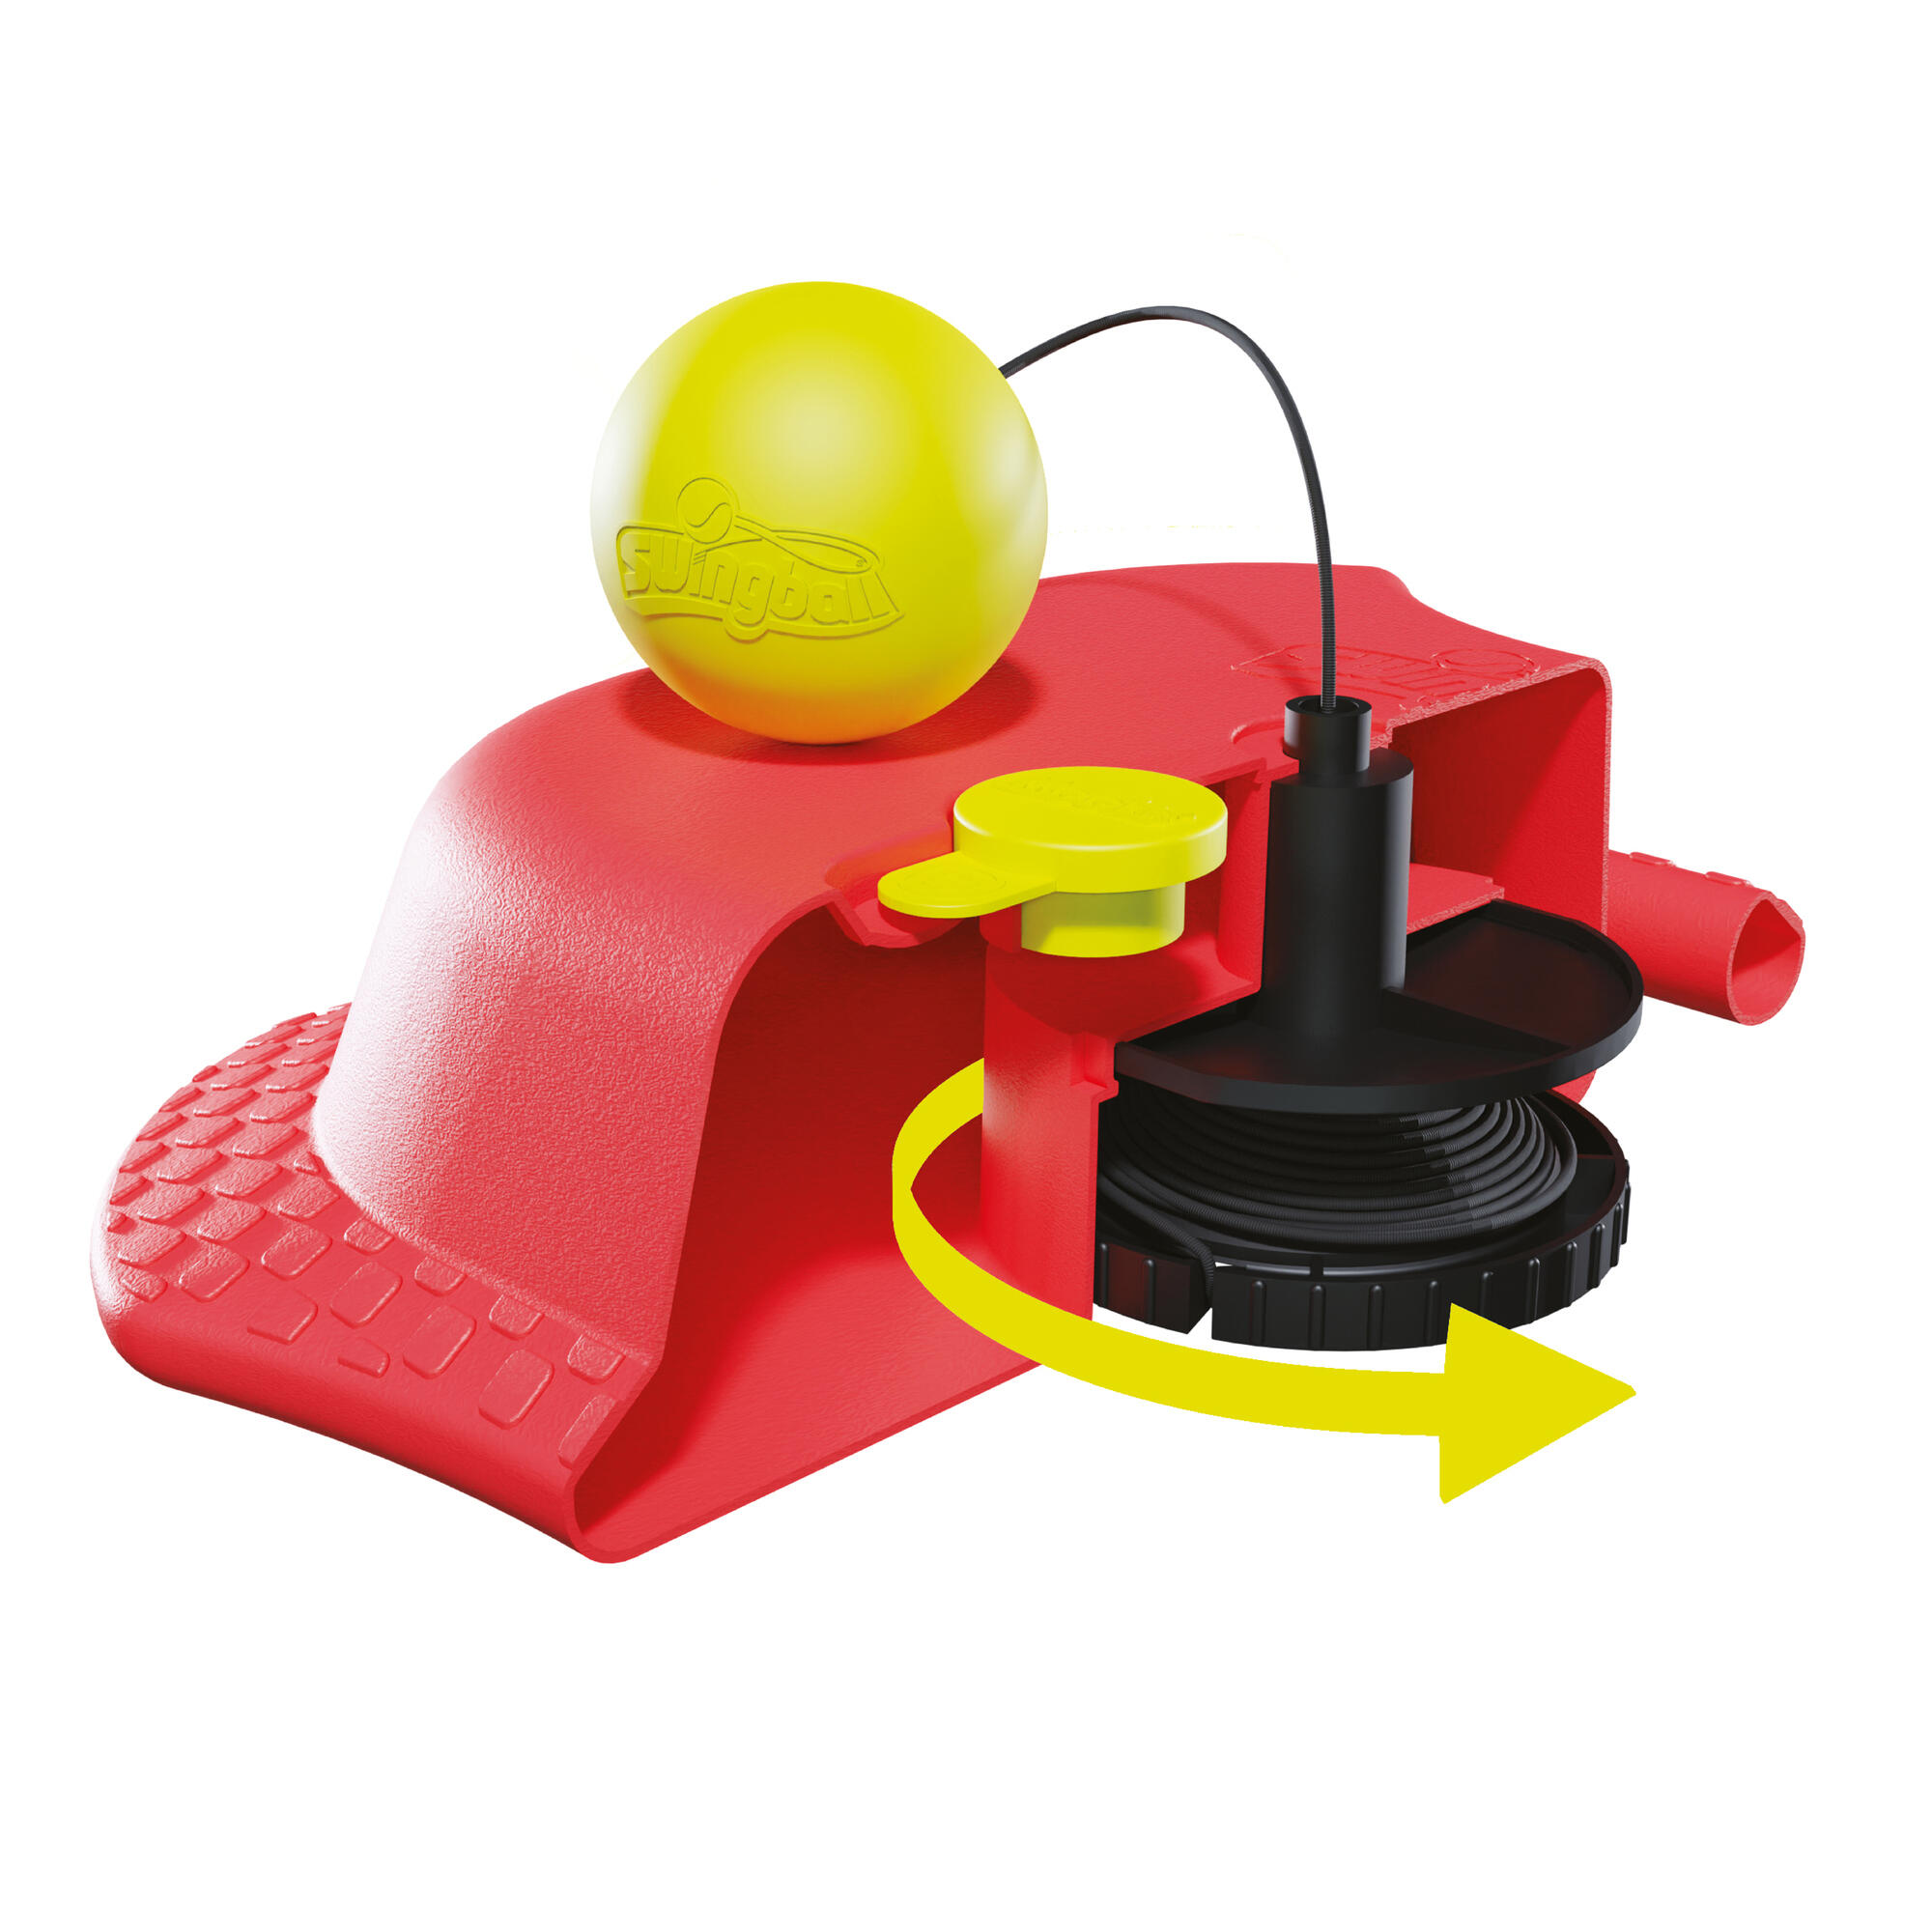 SWINGBALL All Surface Reflex Tennis Tetherball (Red/Yellow)